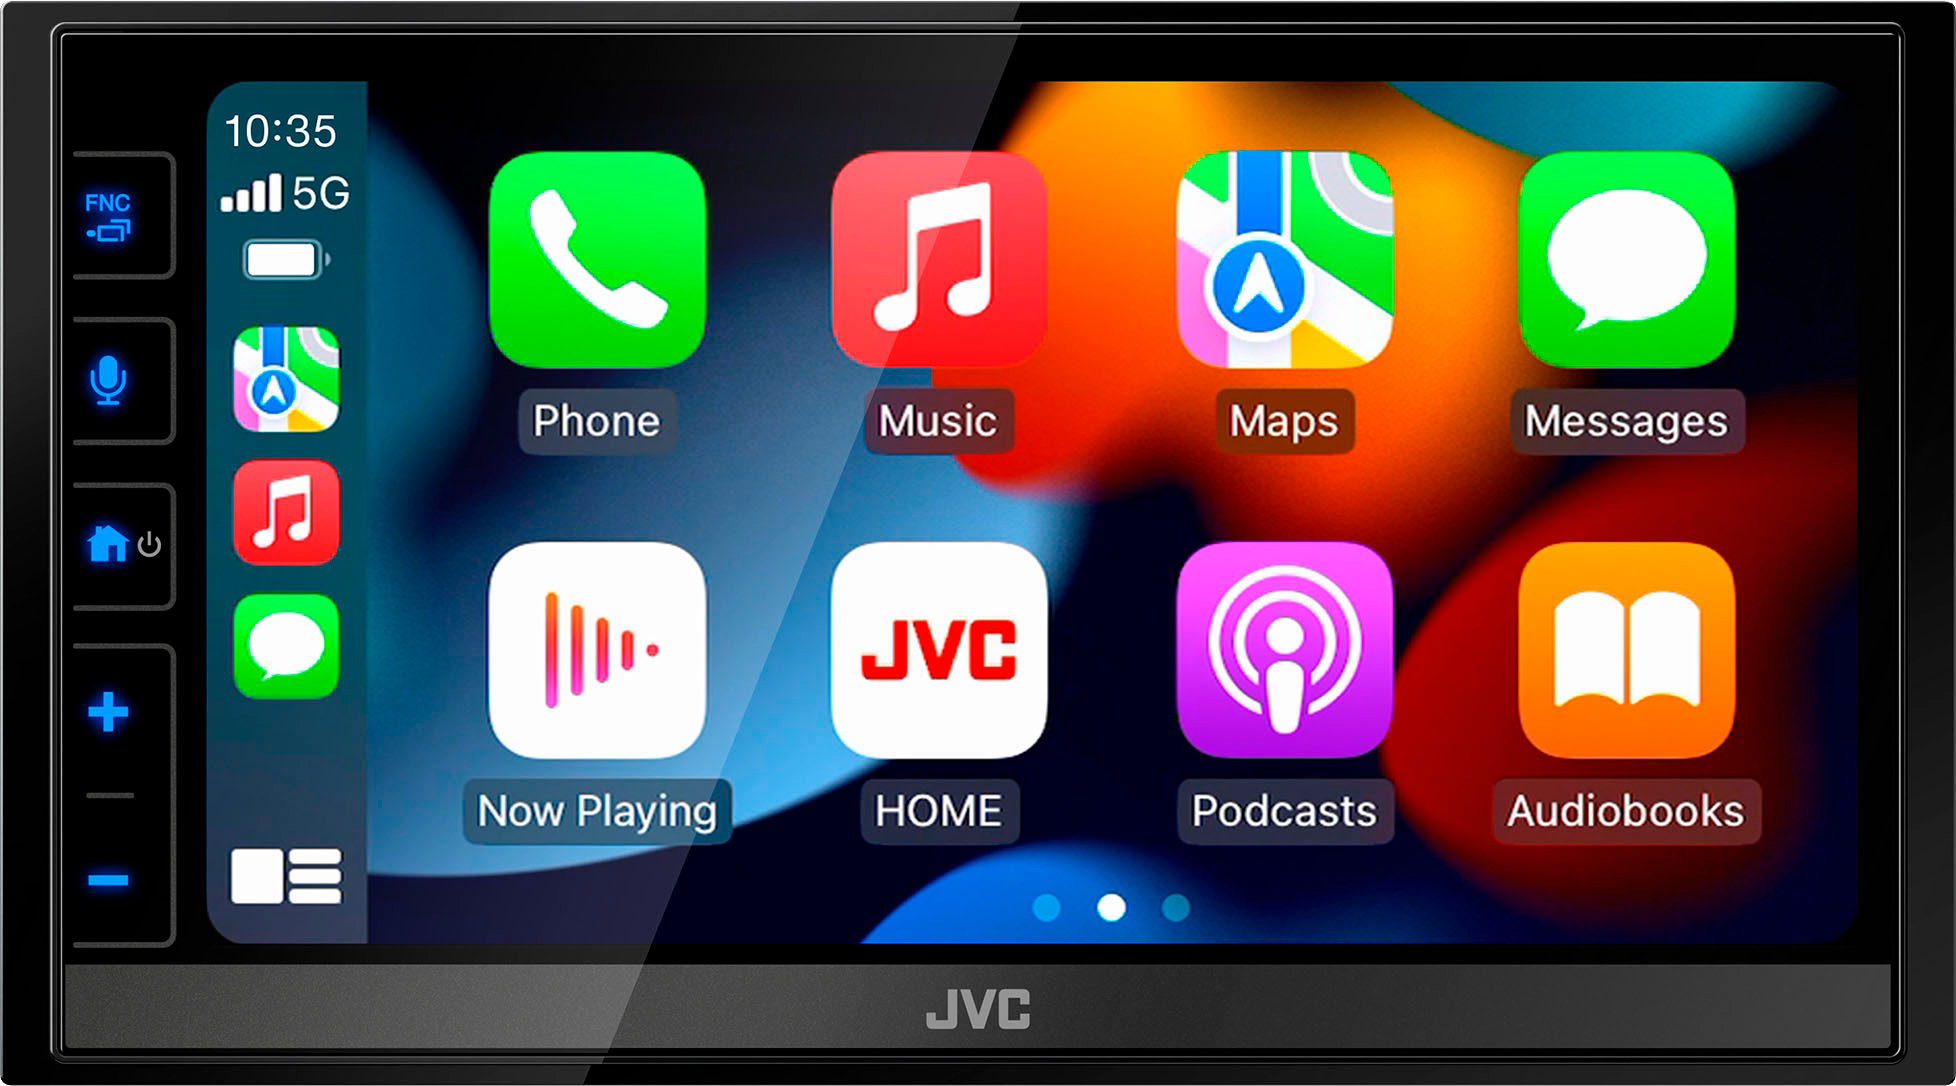 JVC 6.8 Wireless Android Auto, Apple CarPlay Bluetooth Digital Media (DM)  Receiver with Variable Color and SiriusXM Ready Black KW-M785BW - Best Buy